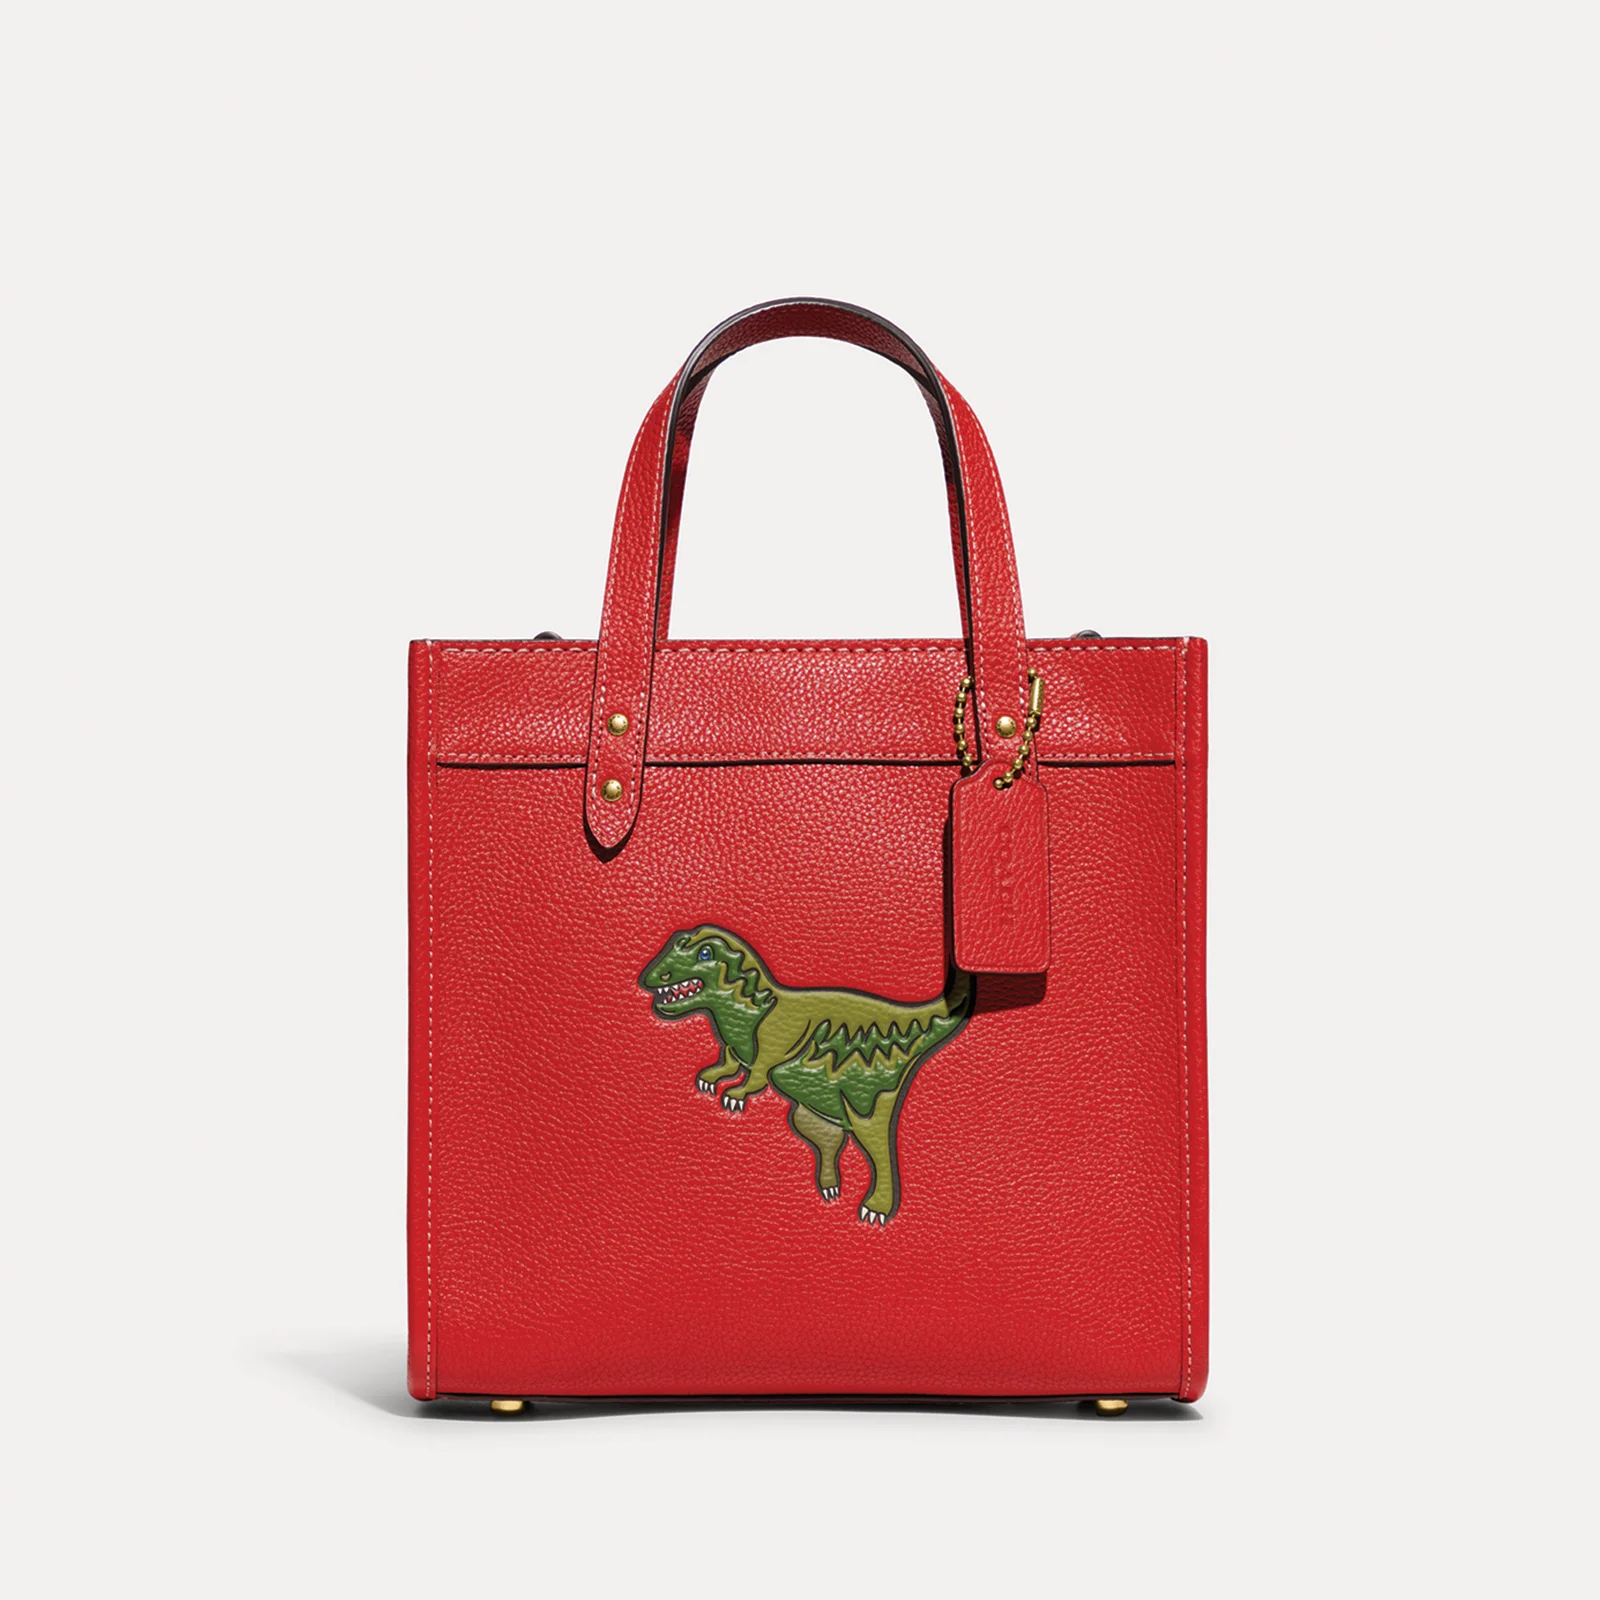 Coach Rexy Field 22 Leather Tote Bag Image 1